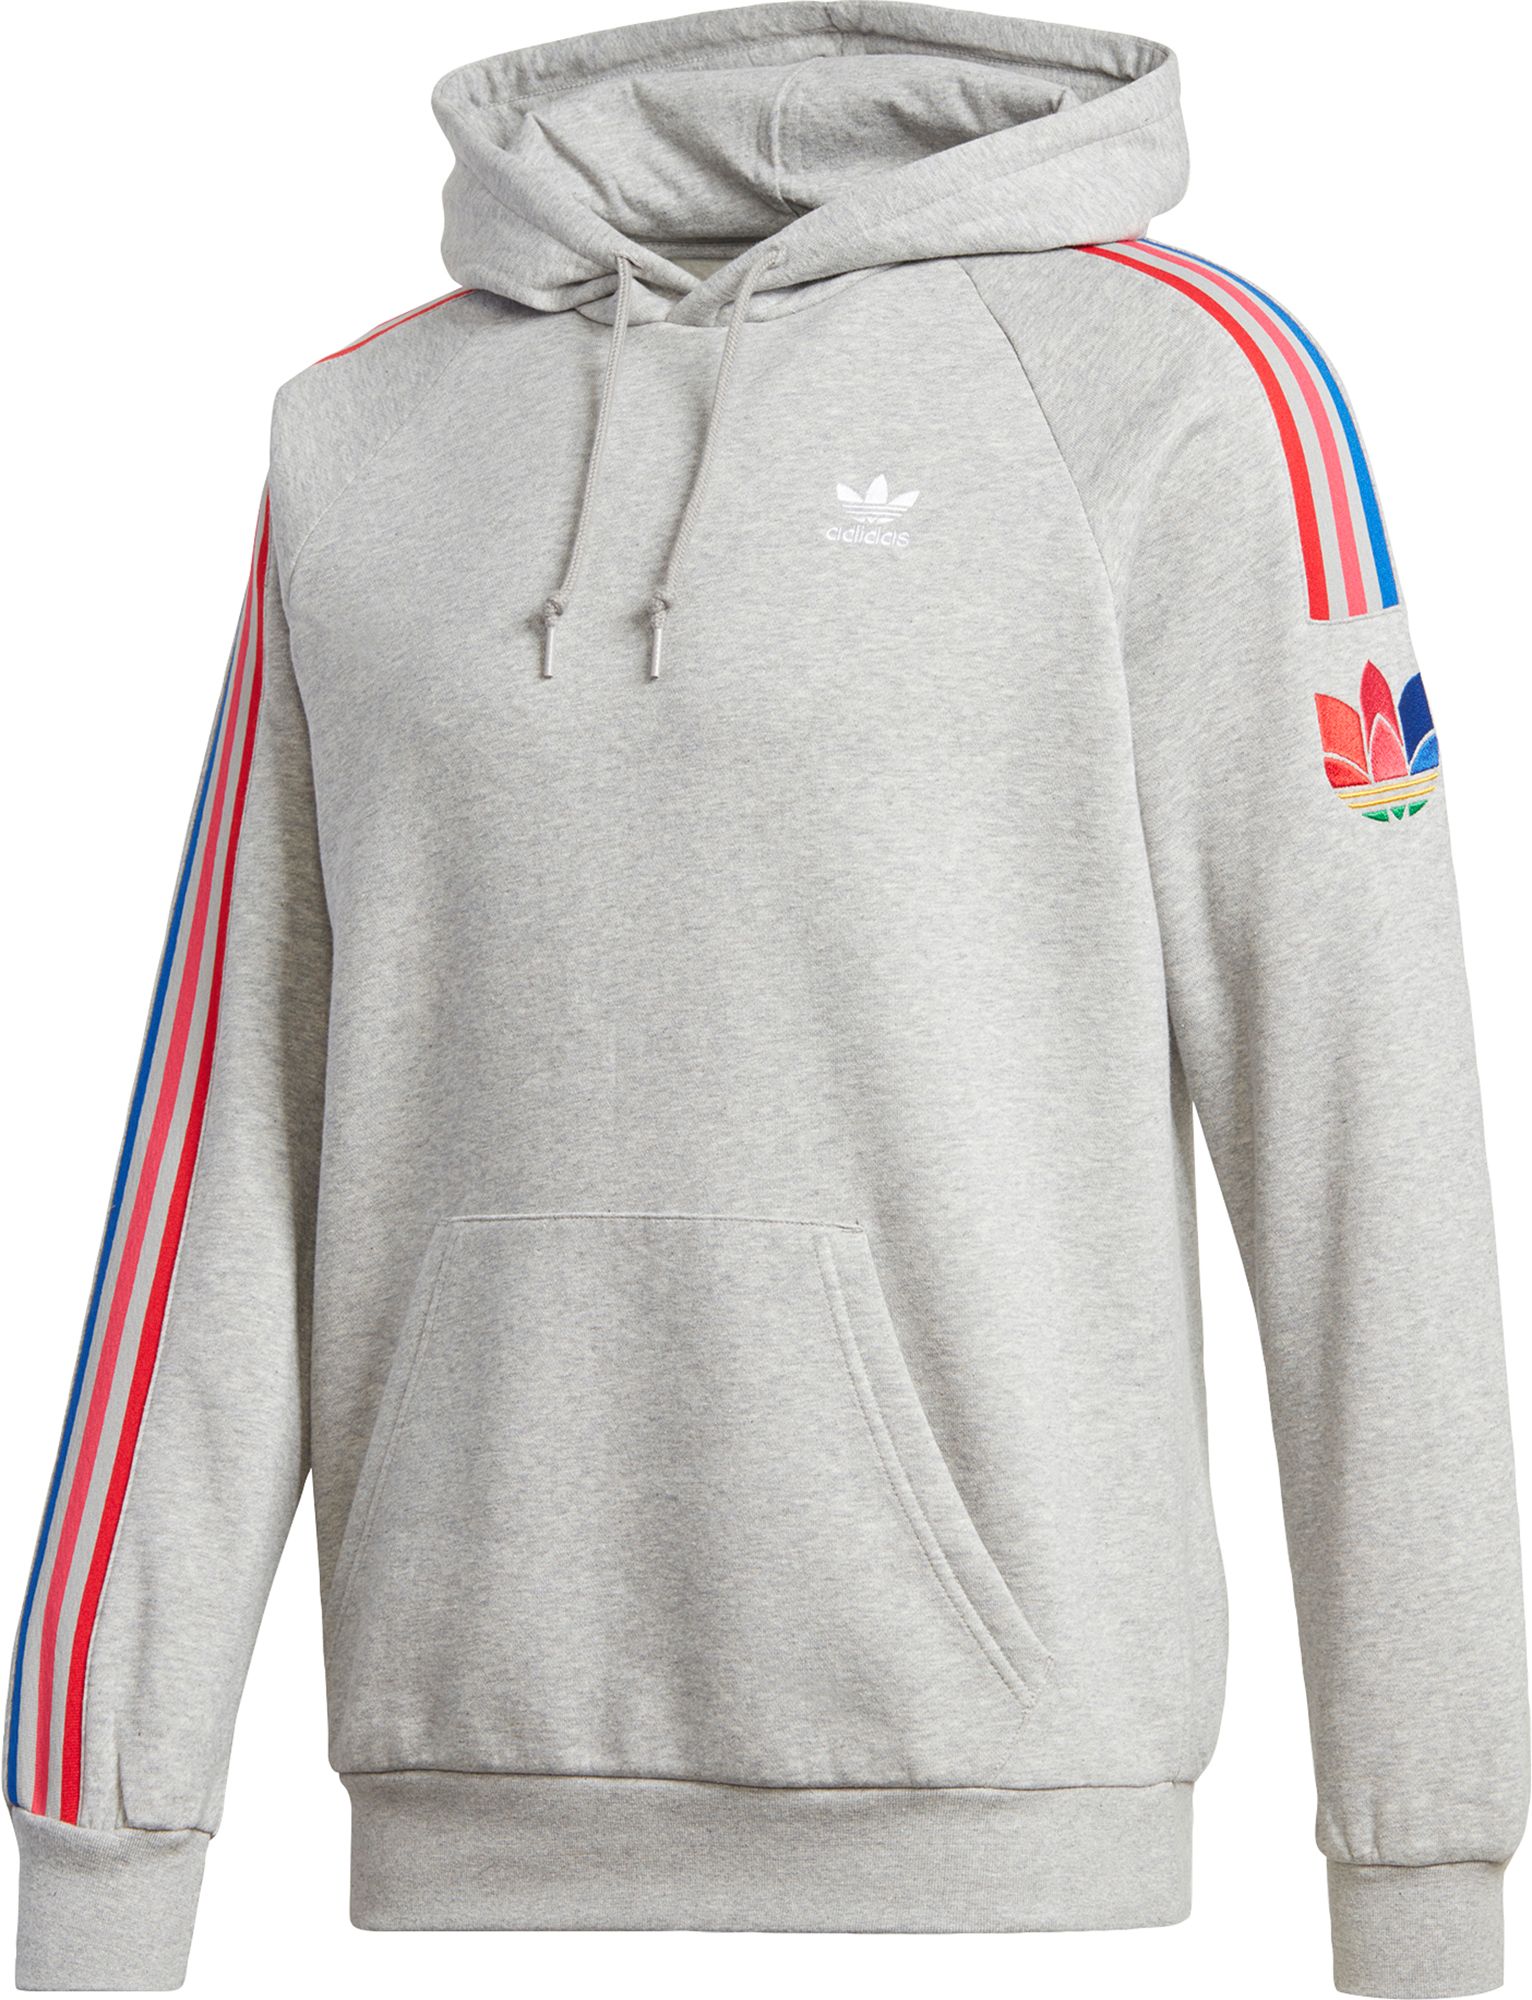 adidas the brand with 3 stripes hoodie